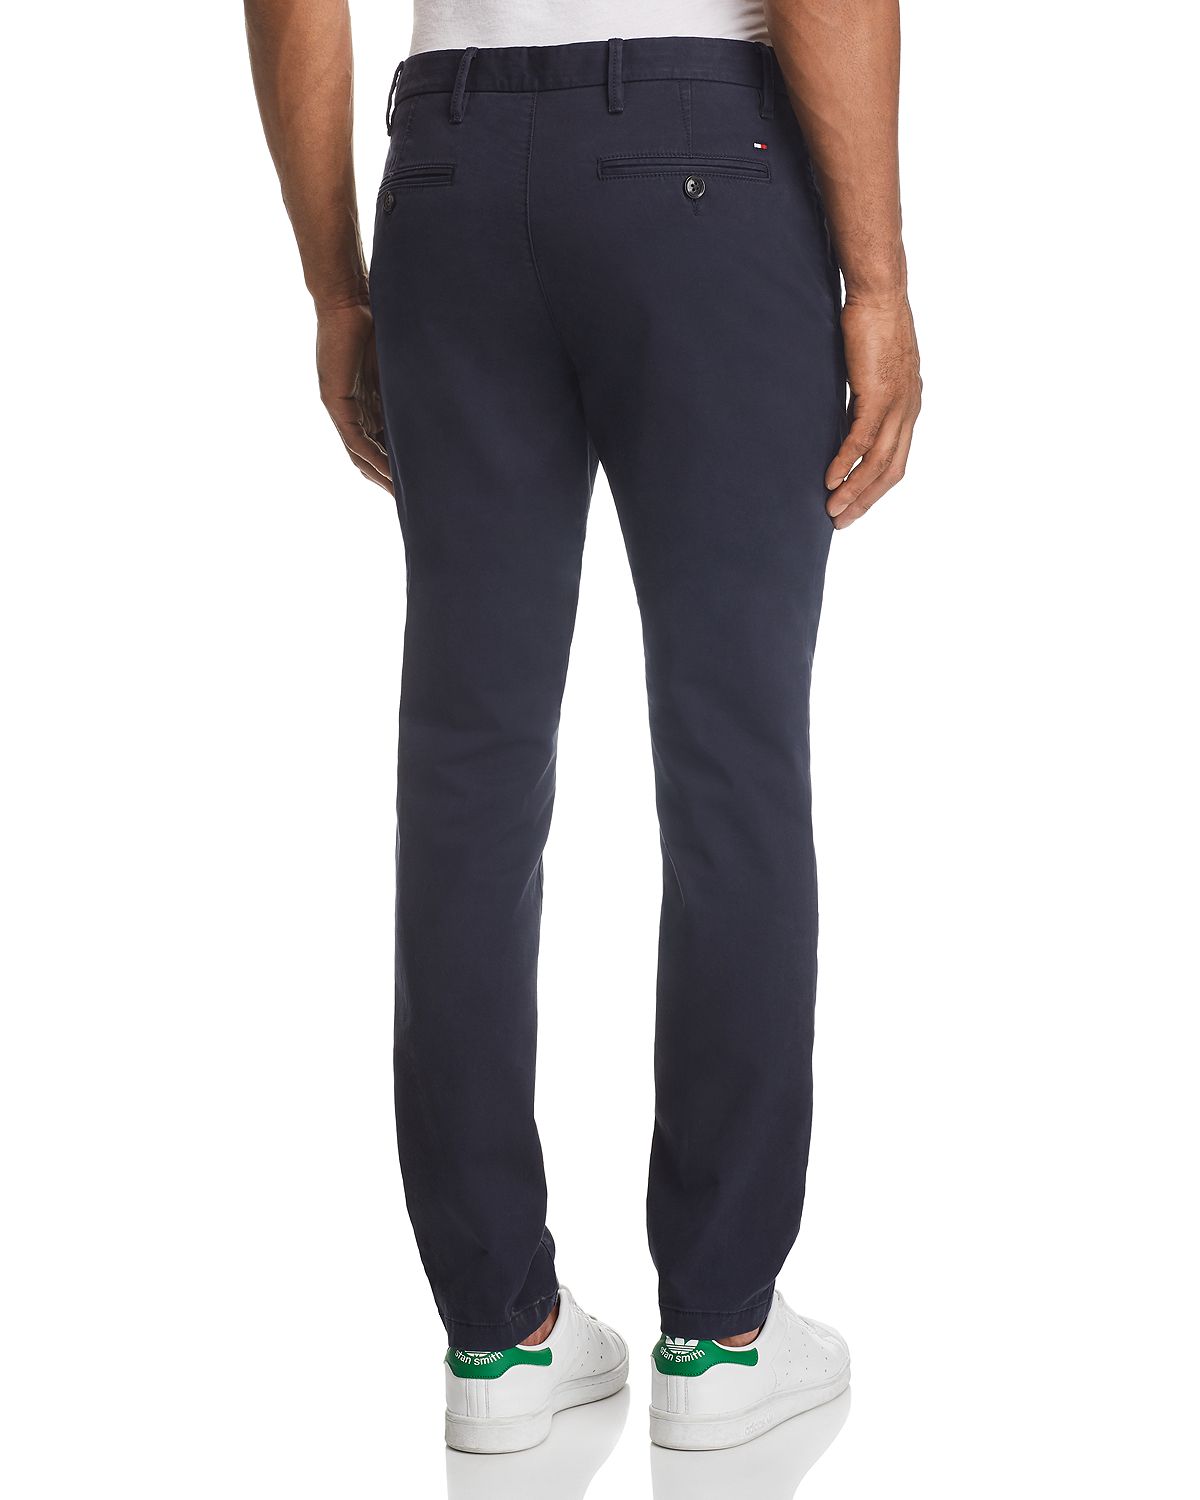 Tommy Hilfiger Denton Straight Fit Chinos Sky Captain